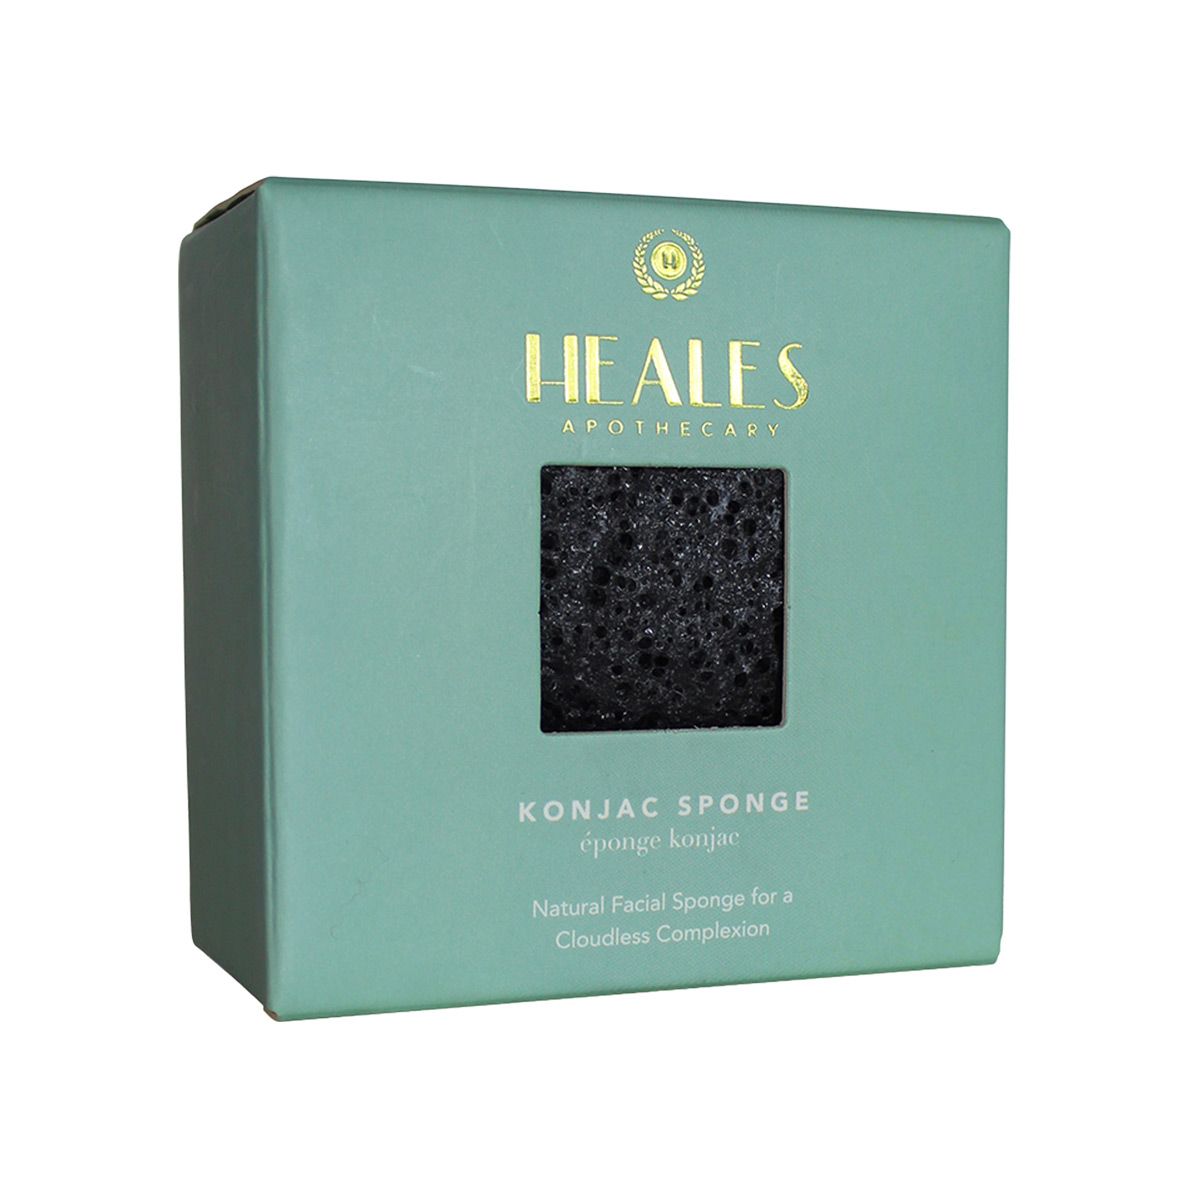 Heales Apothecary Konjac Sponge Charcoal | The Container Store